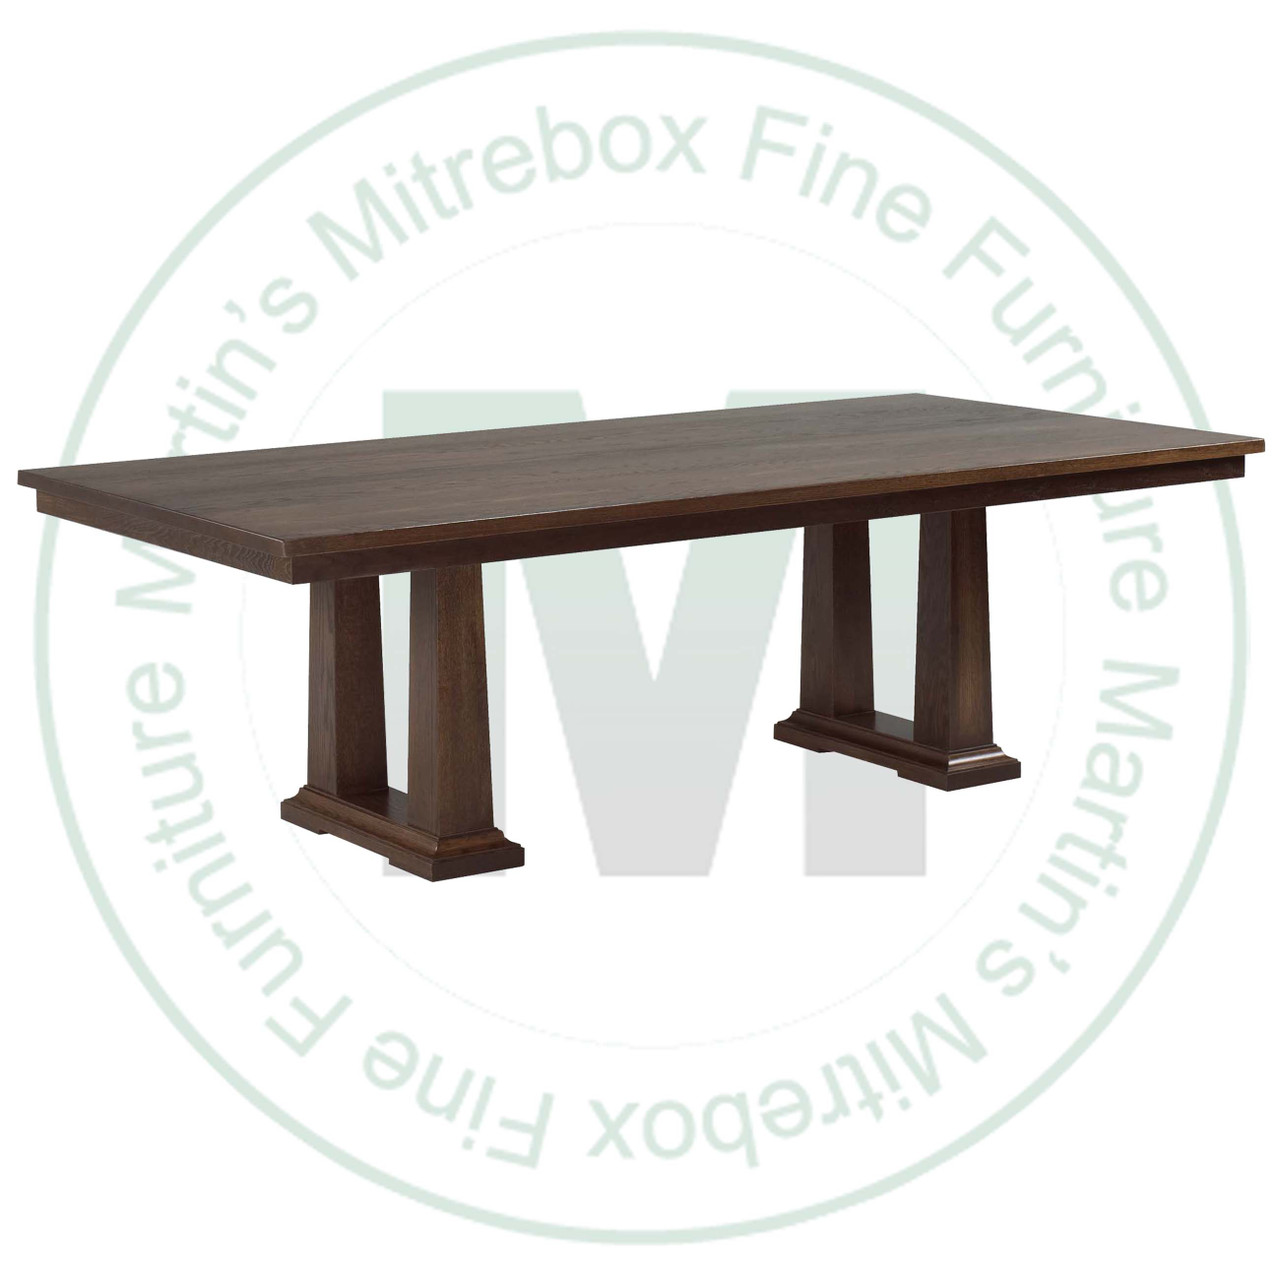 Oak Acropolis Extension Double Pedestal Table 54''D x 96''W x 30''H With 3 - 12'' Leaves Table Has 1.75'' Thick Top